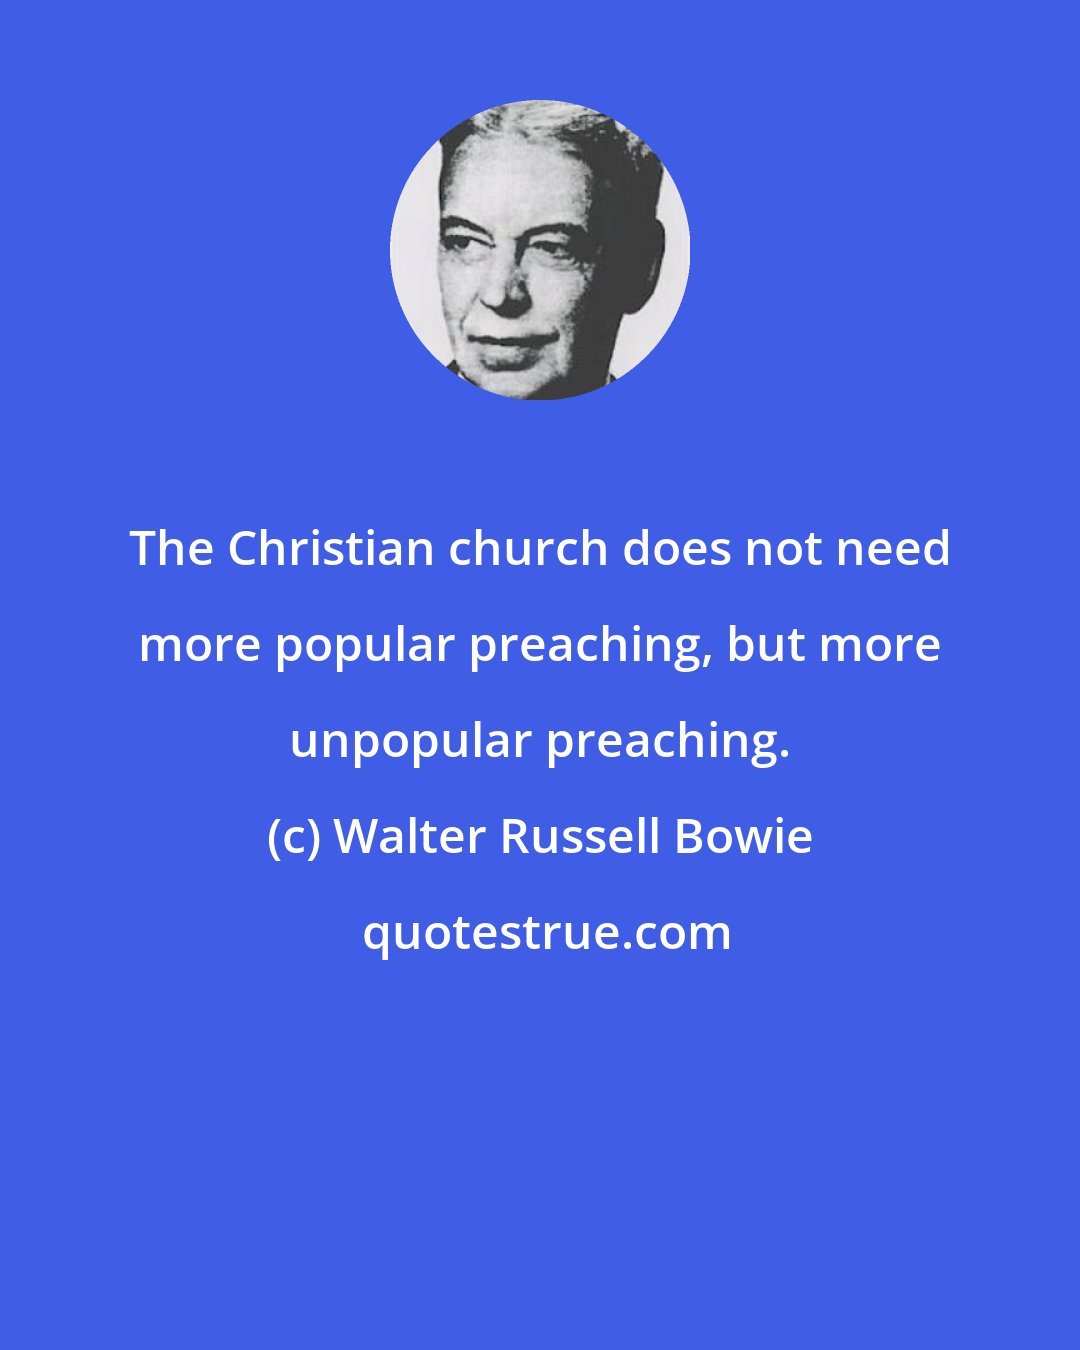 Walter Russell Bowie: The Christian church does not need more popular preaching, but more unpopular preaching.